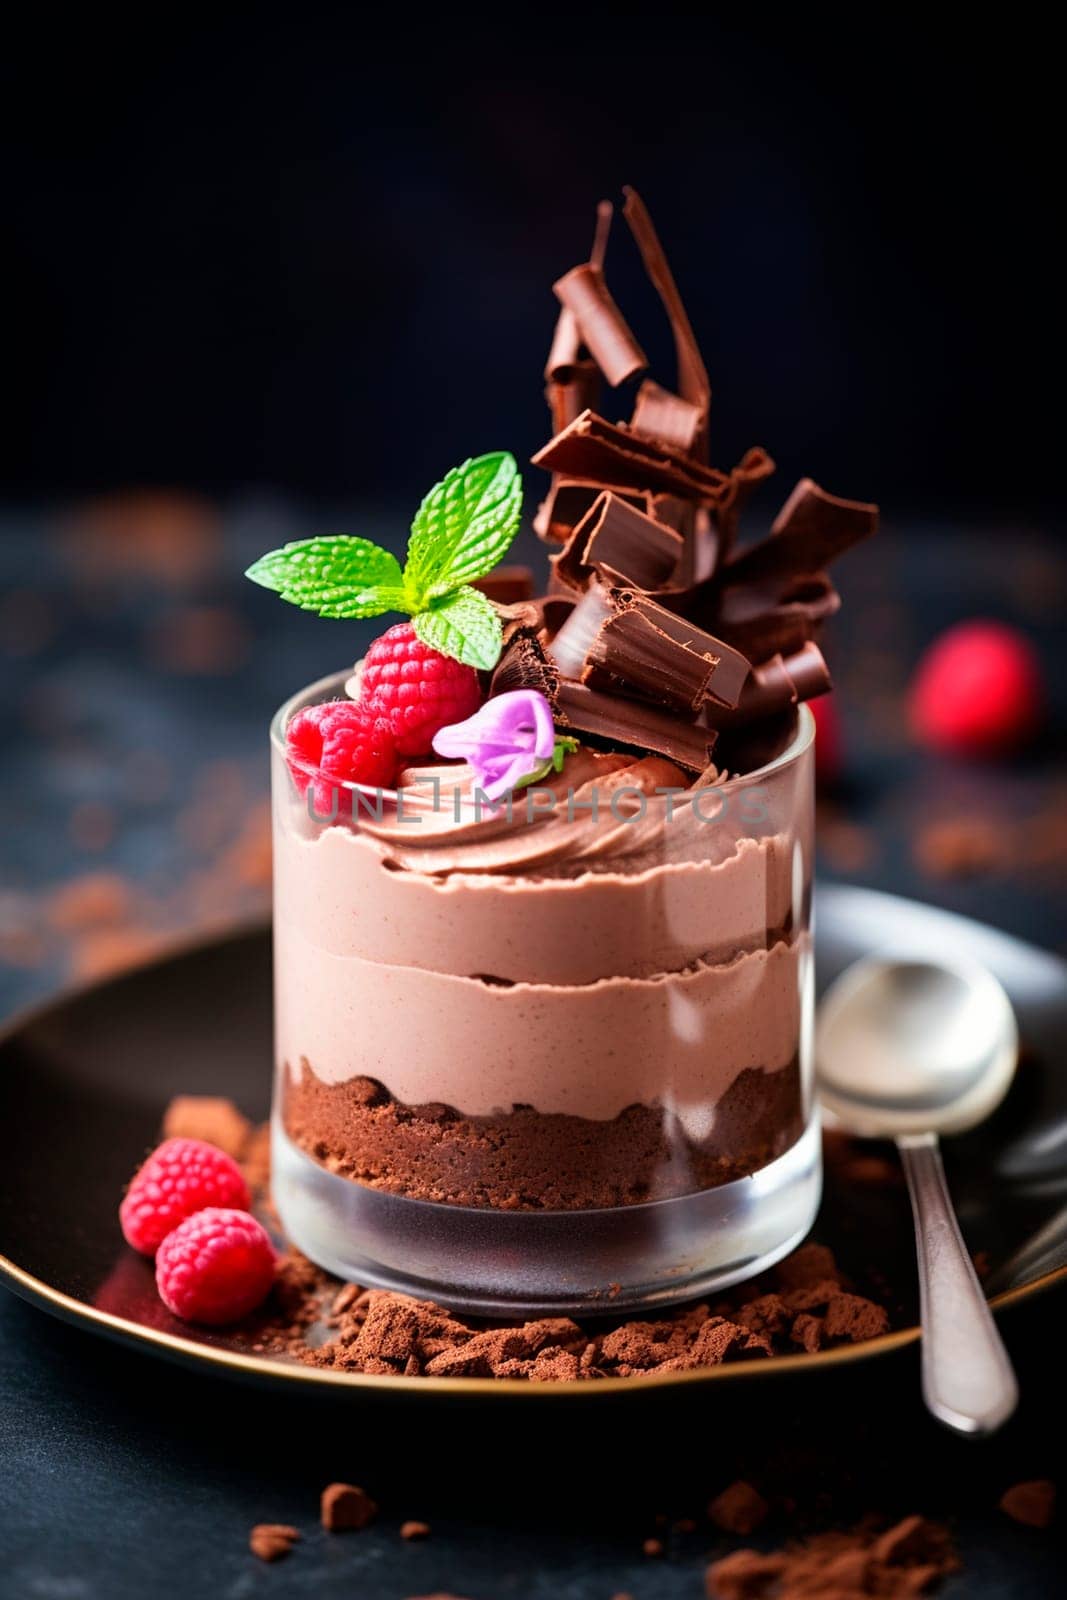 Chocolate mousse dessert on a plate in a glass. Selective focus. by yanadjana